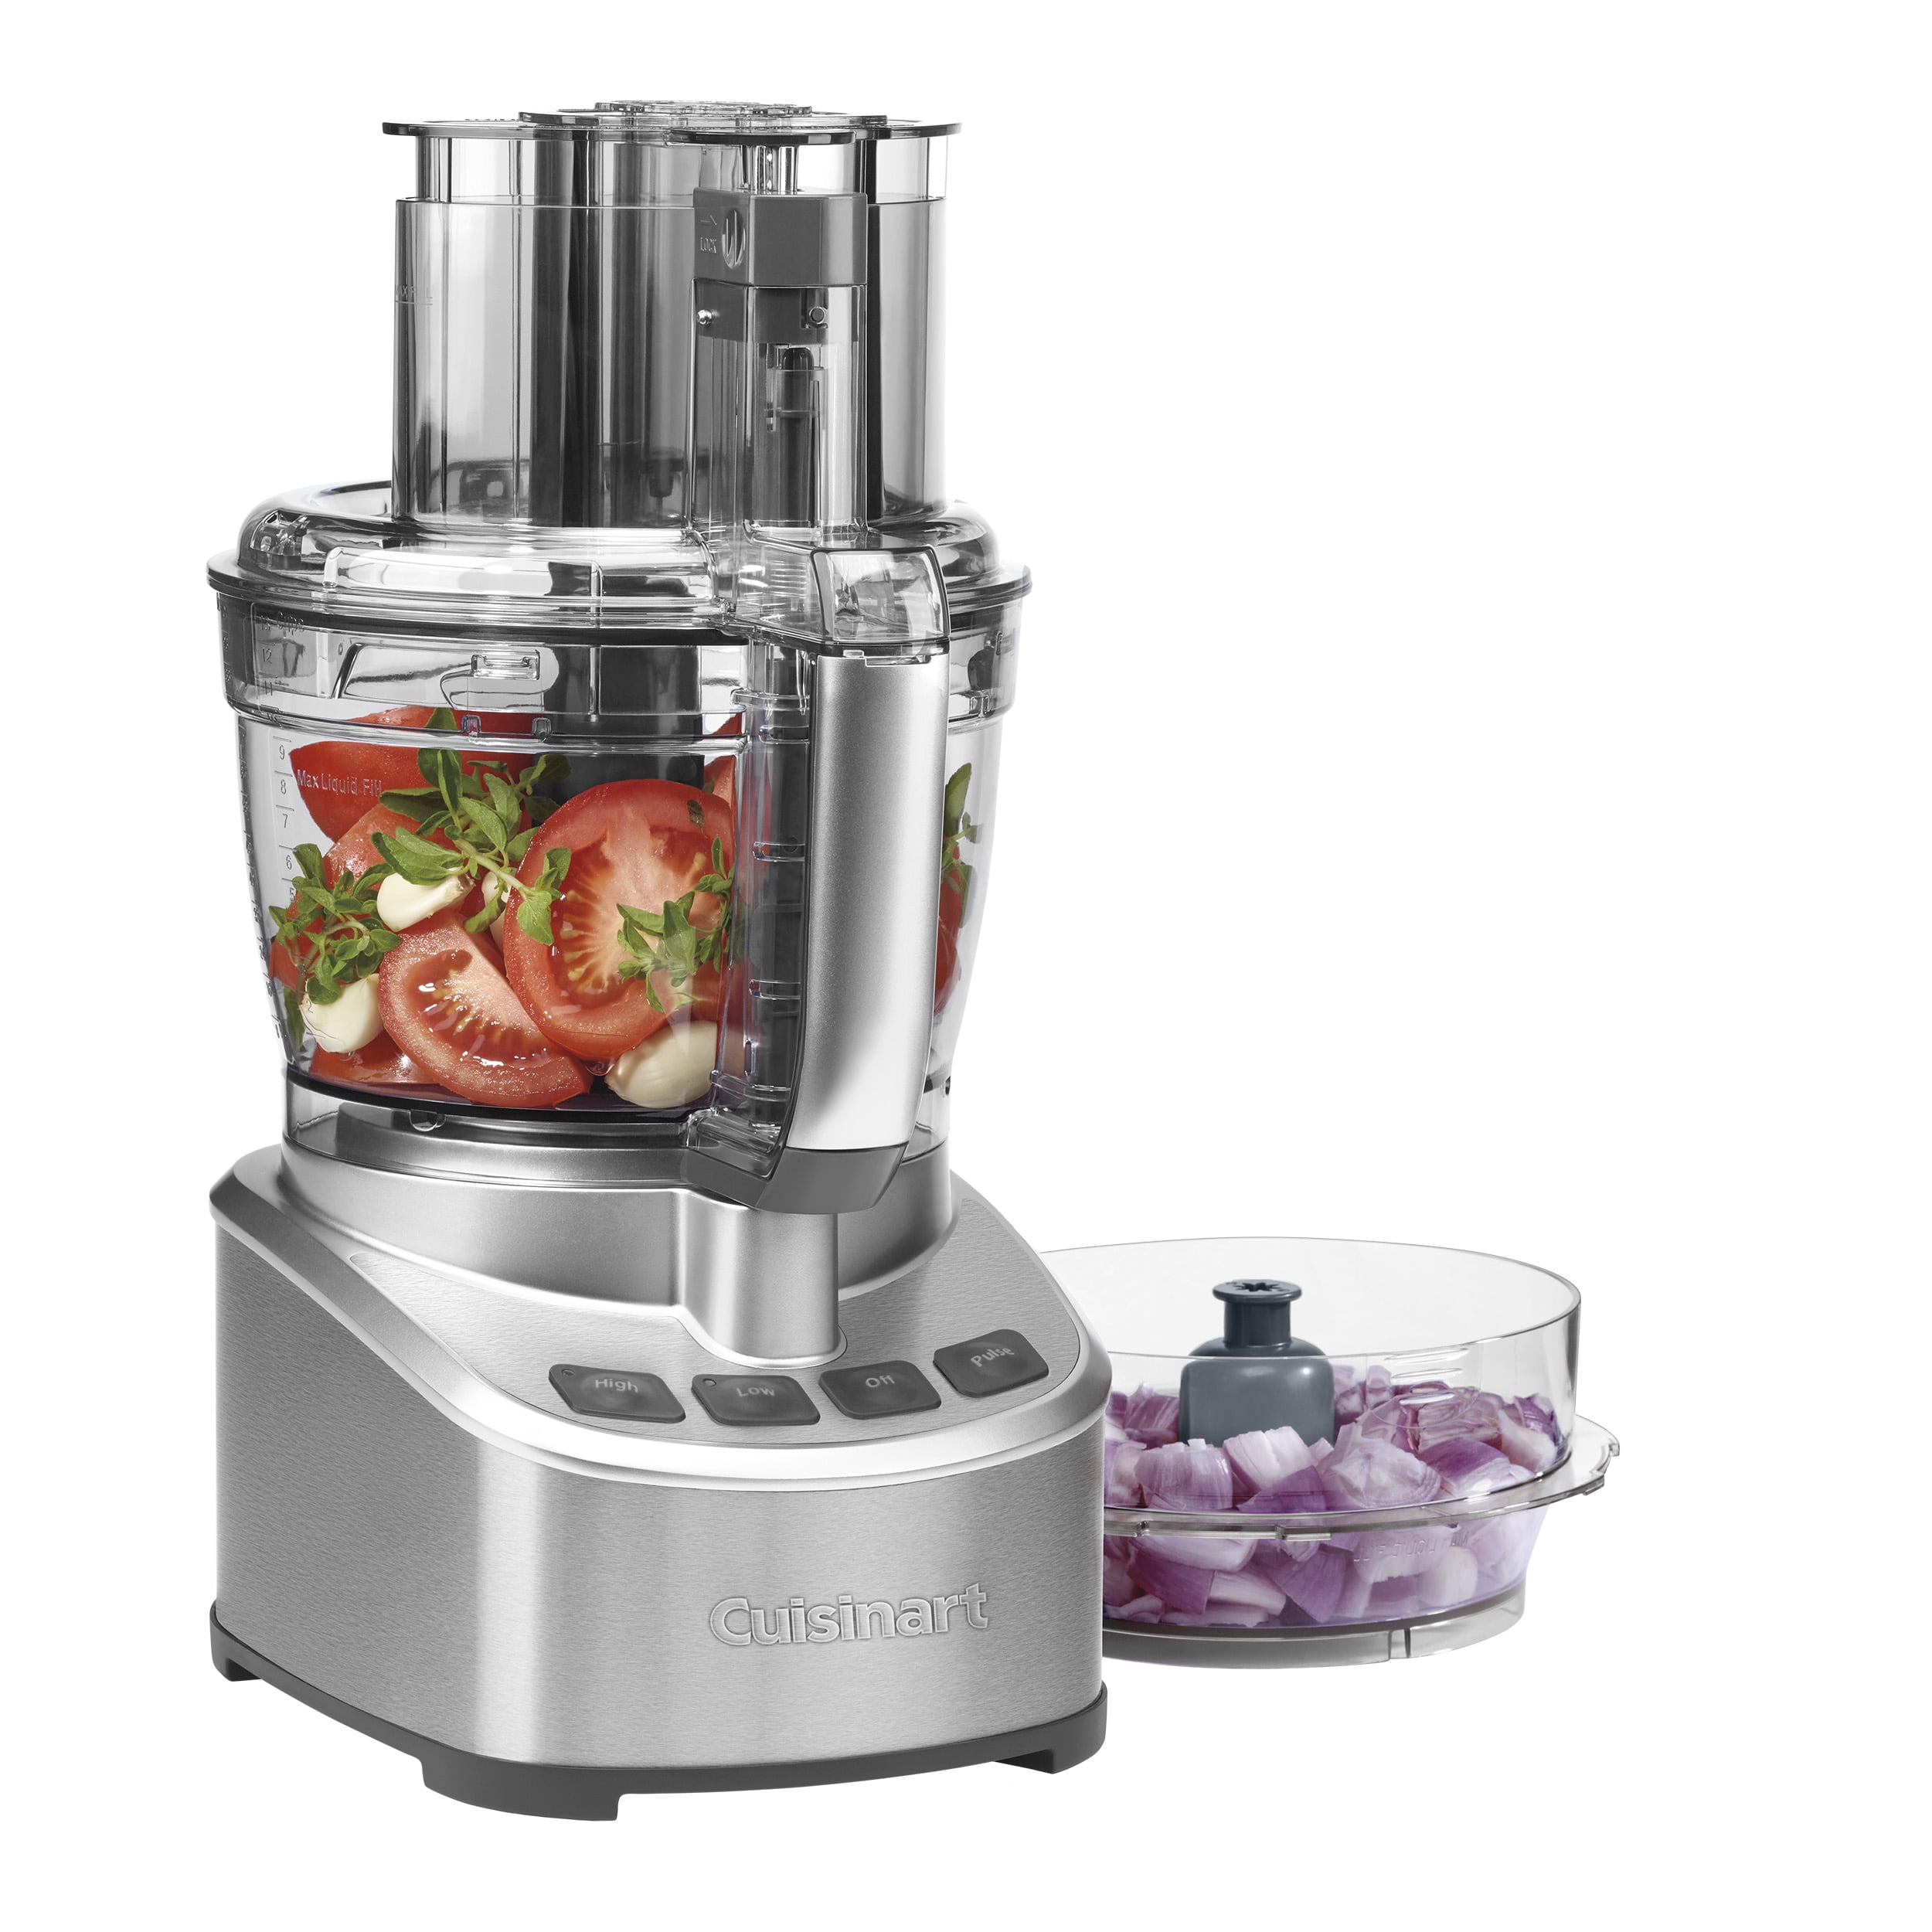 Cuisinart 13-cup Stainless Steel Food Processor